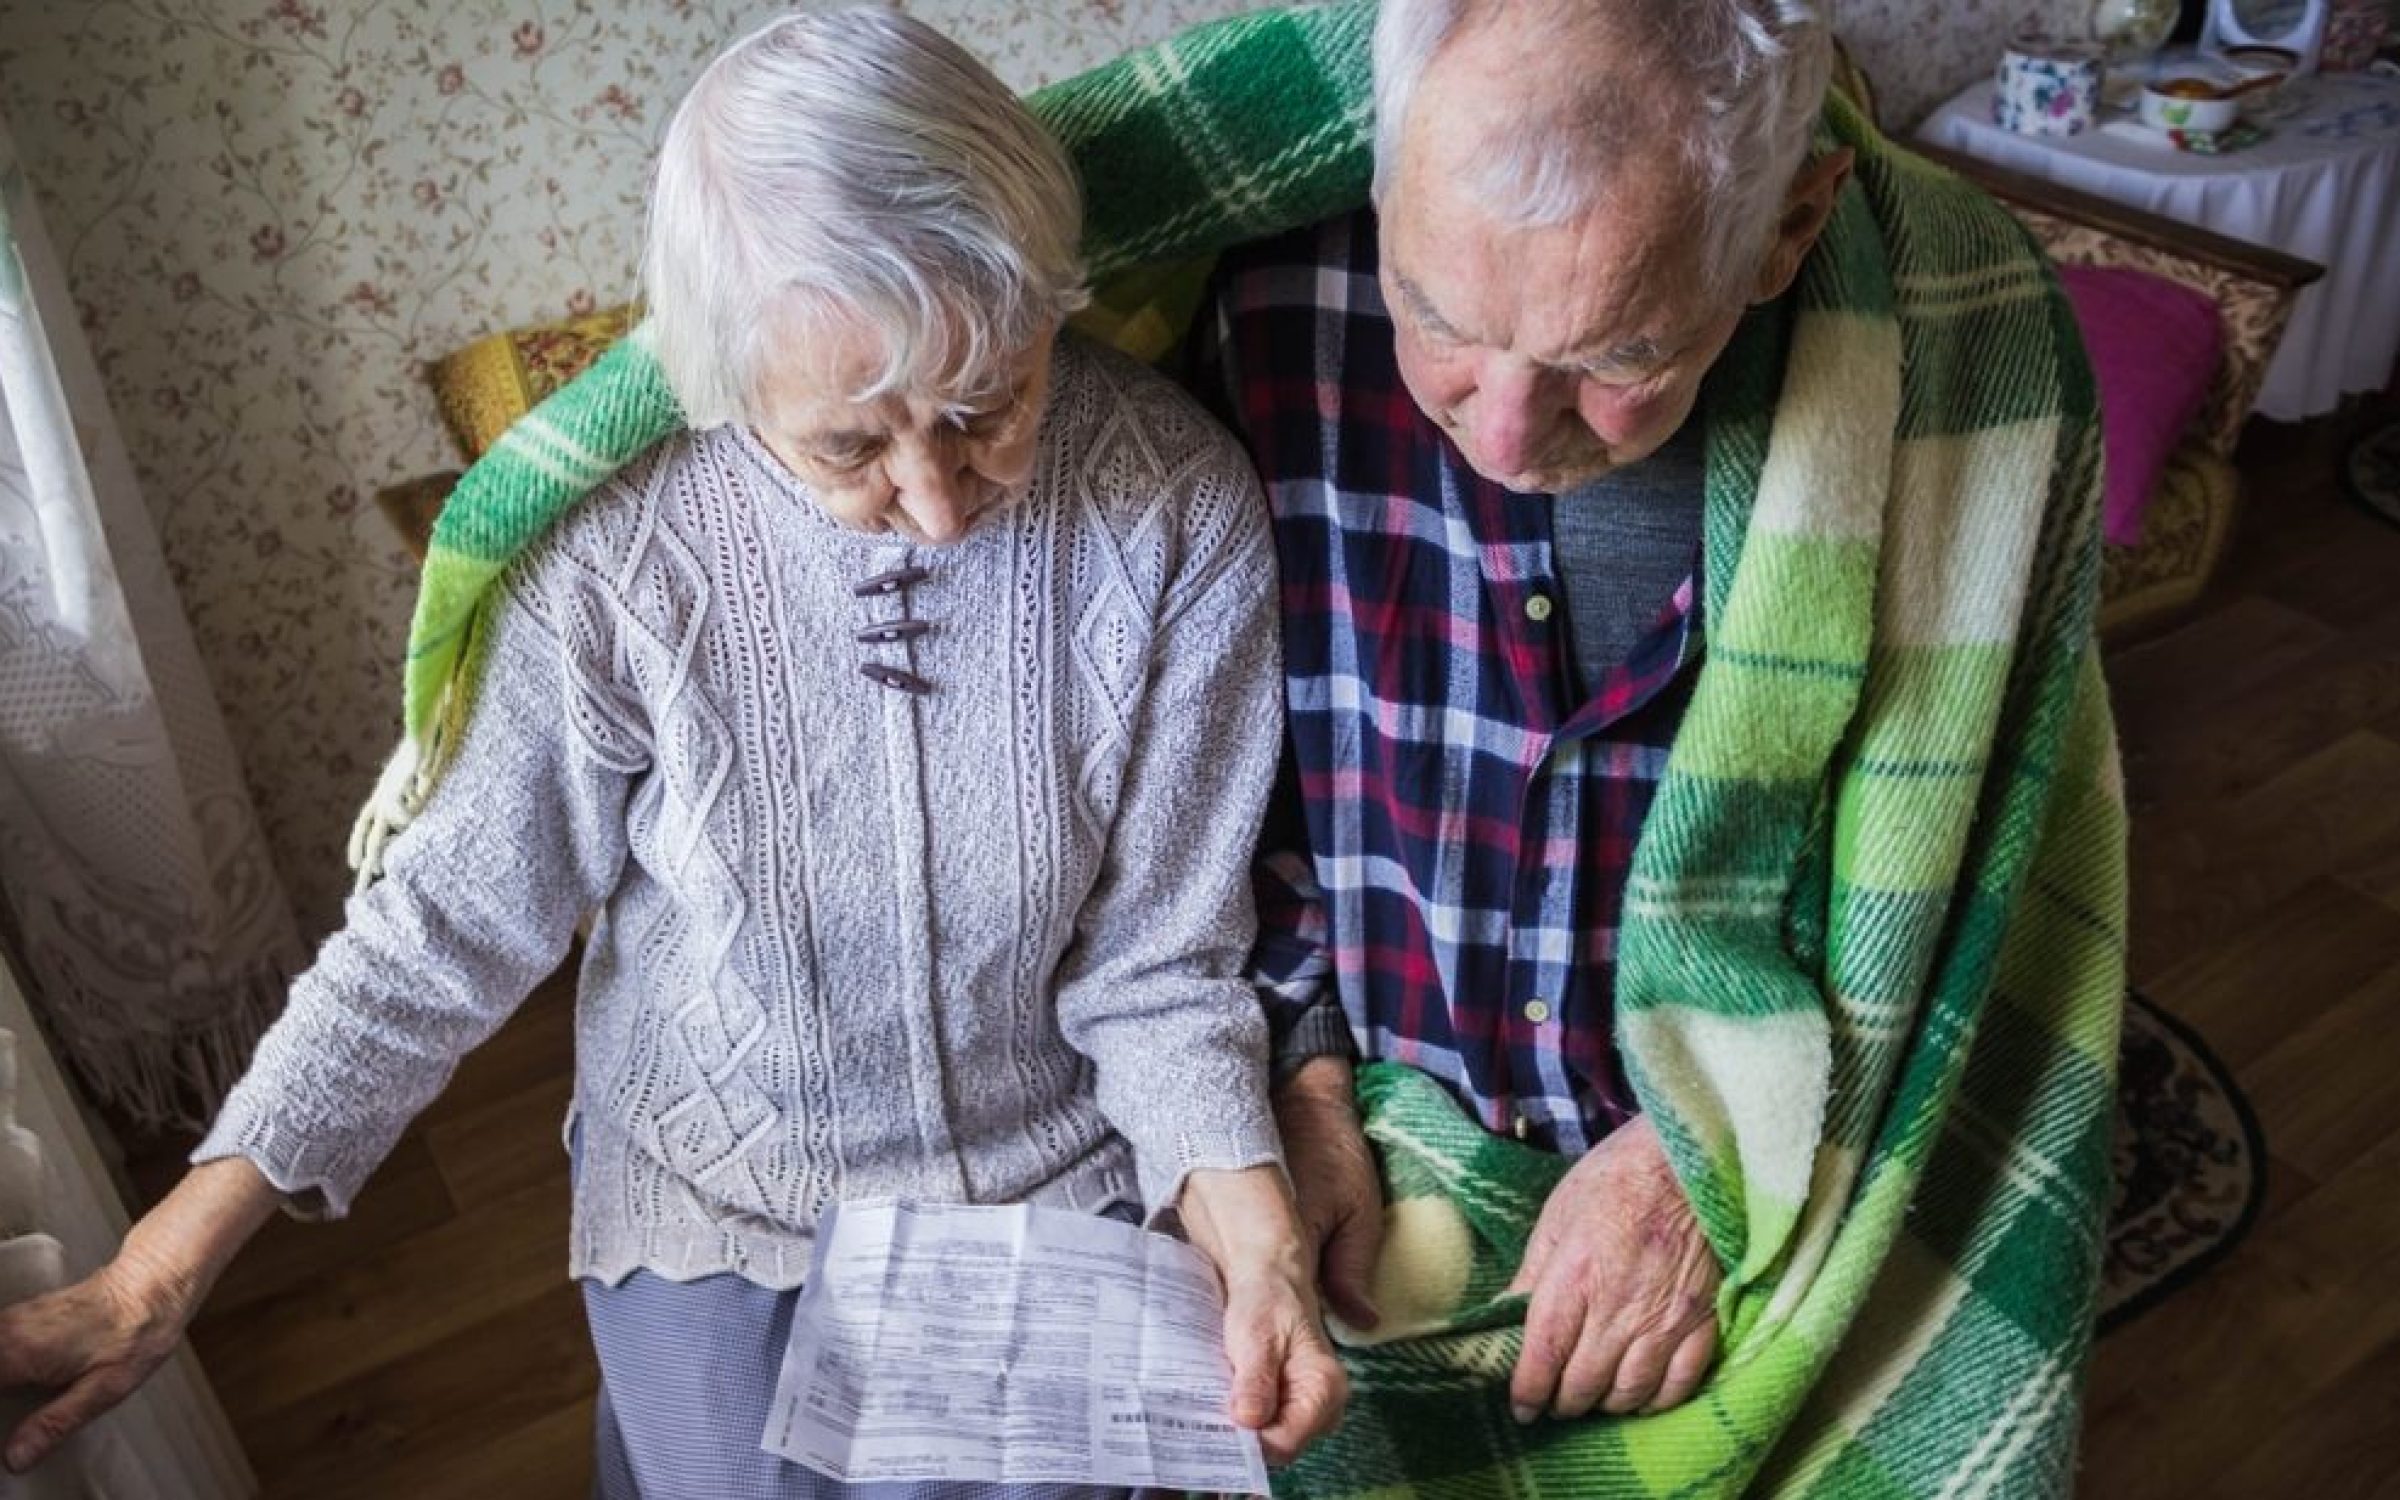 energy crisis, elderly couple worried about bills, will there be a public campaign to provide practical advice on energy saving?